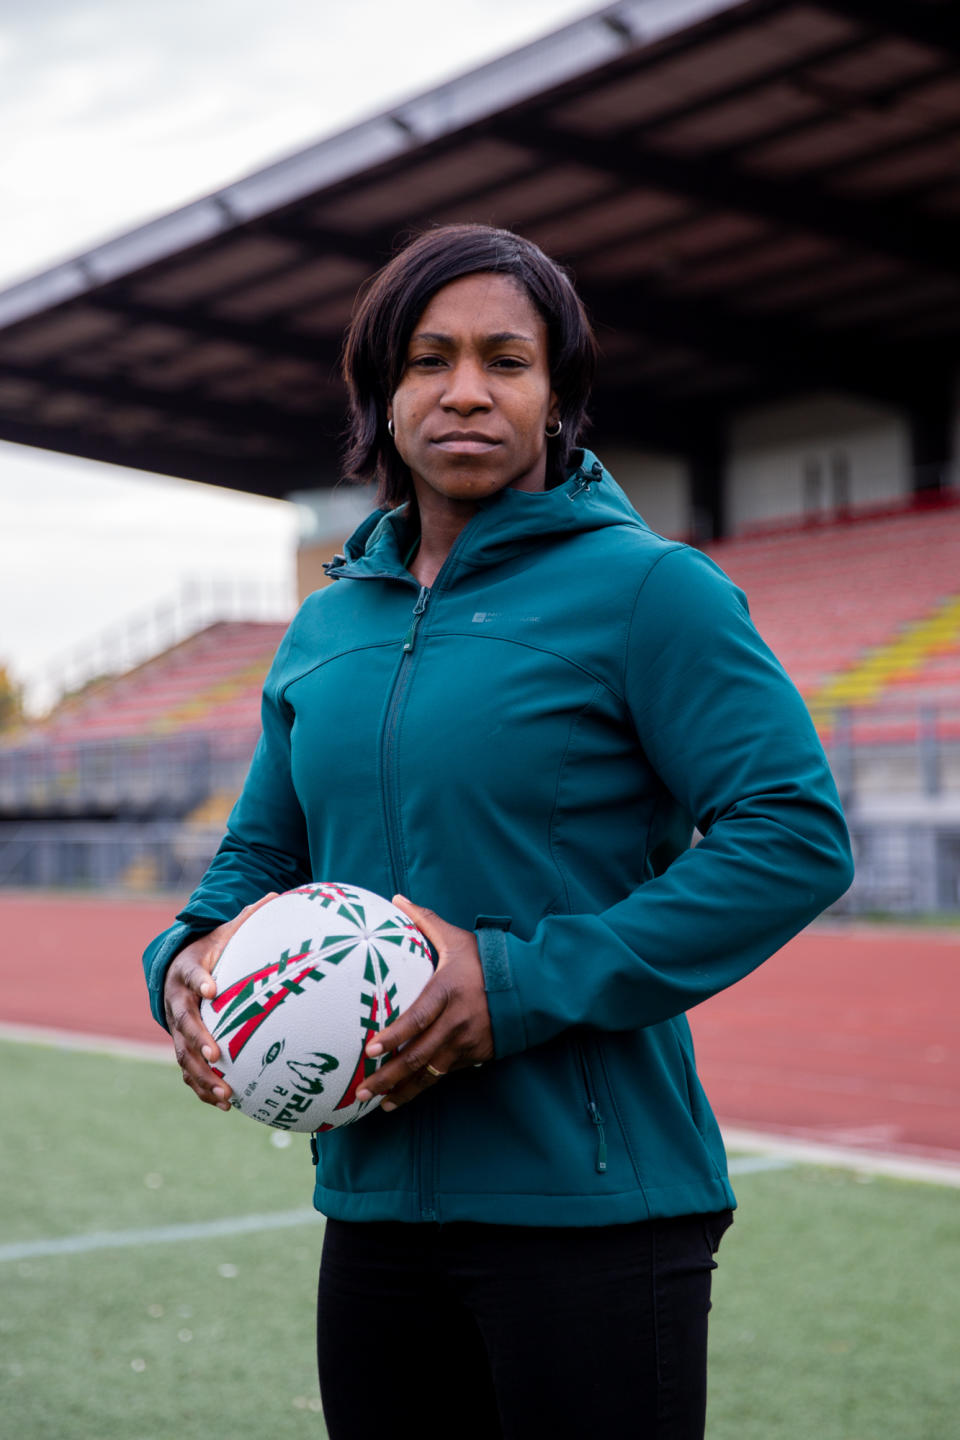 Alphonsi, who went on to win the World Cup with England in 2014, had her untapped potential first spotted by Liza Burgess, Welsh Rugby Union (WRU) Female Age Grade Lead